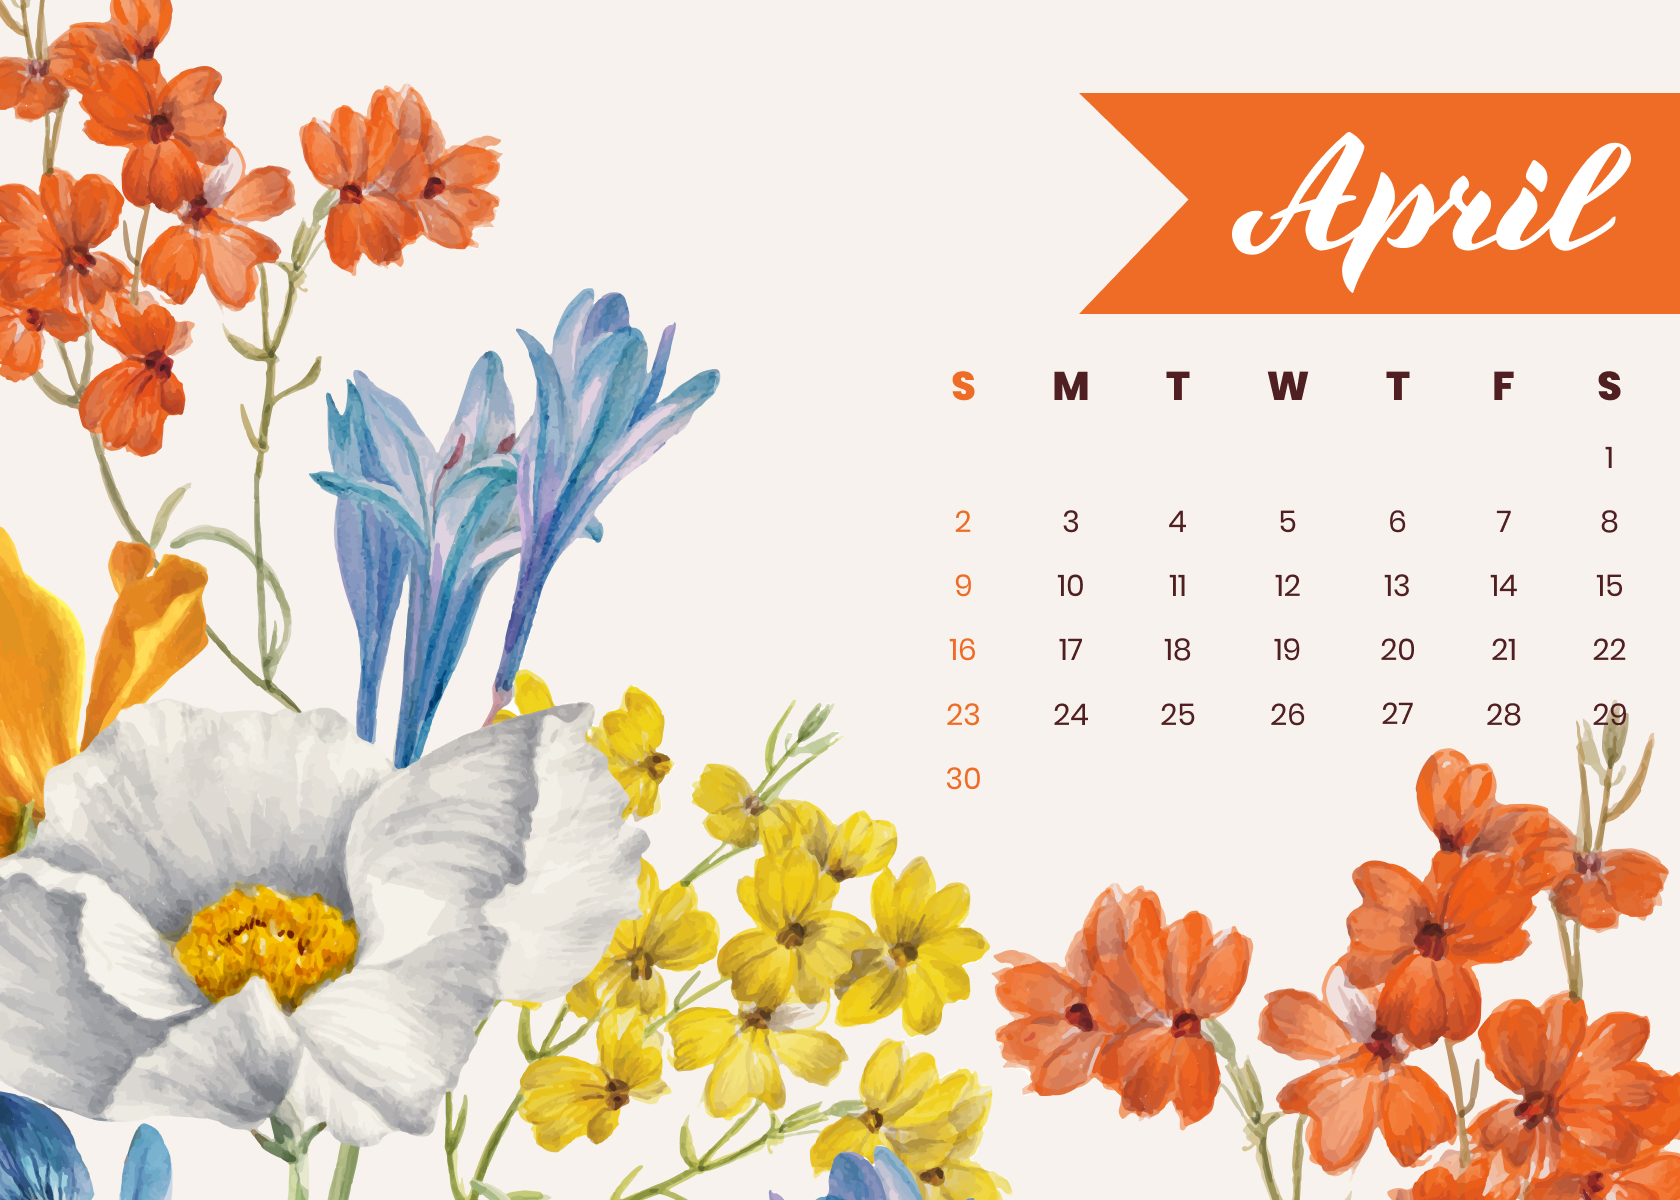 Image of a calendar with flowers on it.